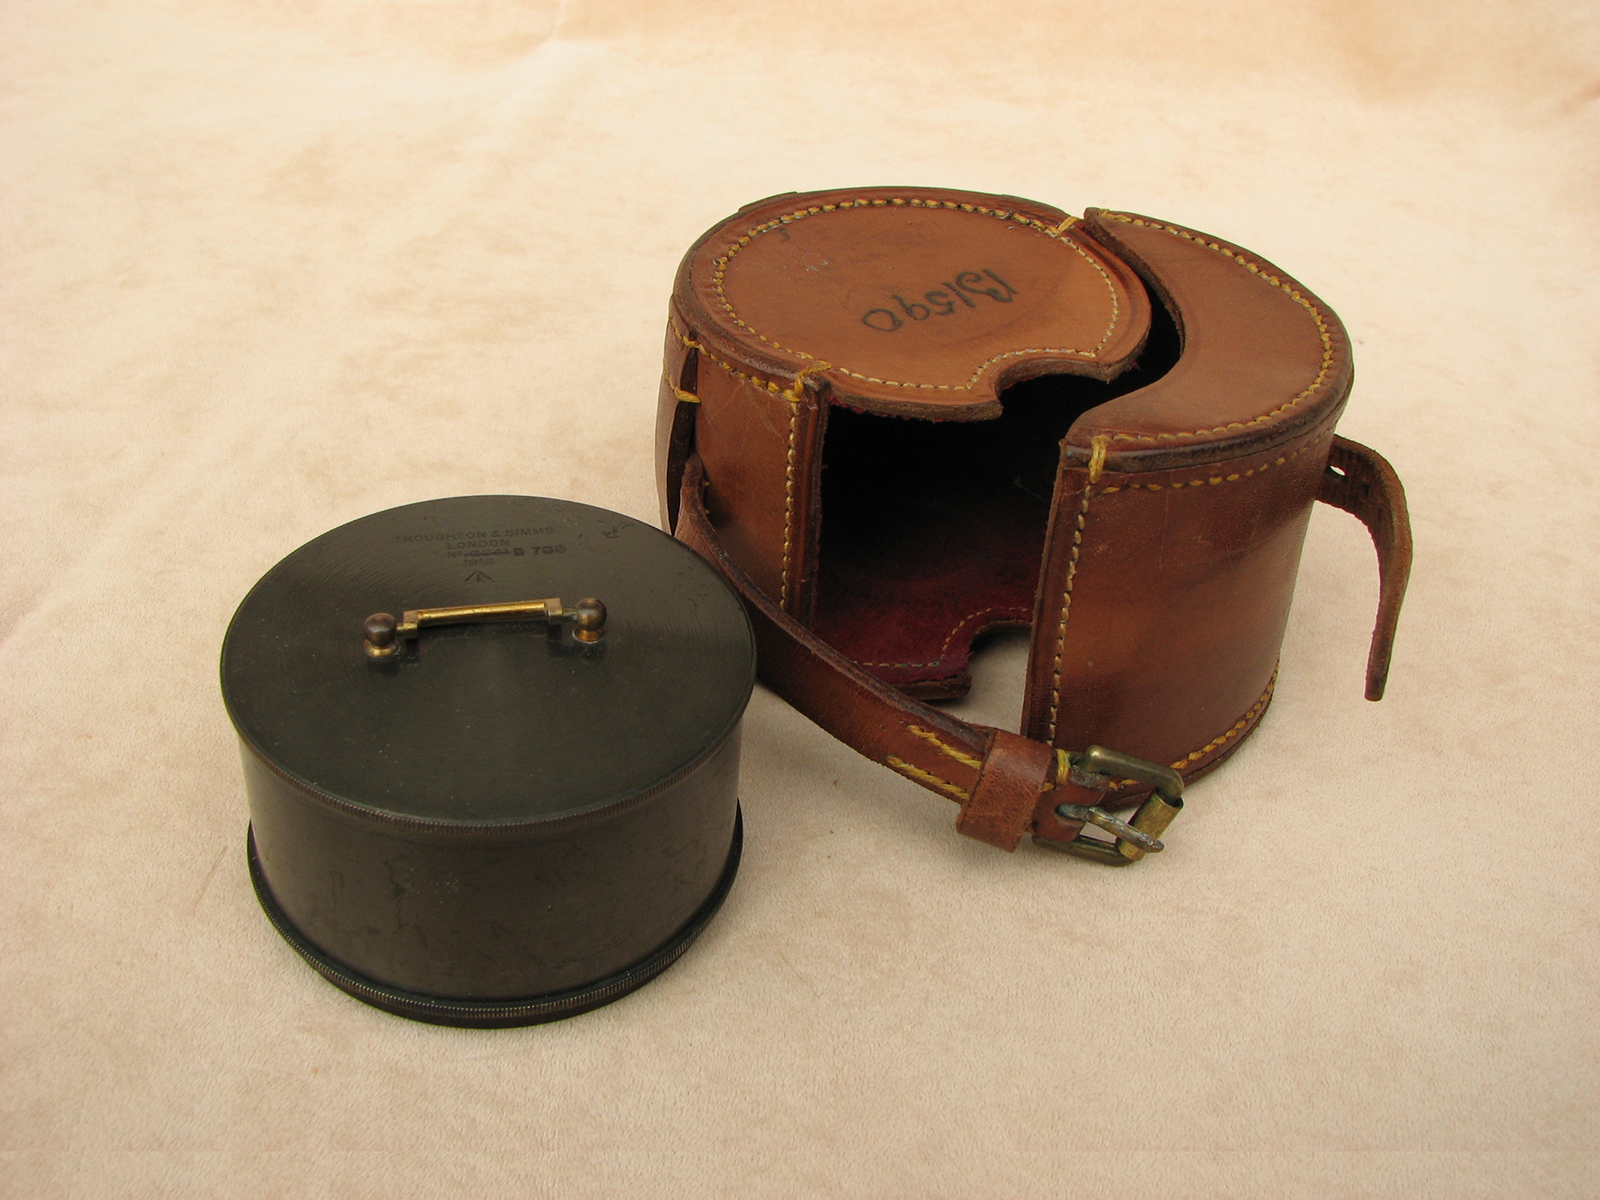 WW1 Troughton & Simms military pocket box sextant - dated 1916